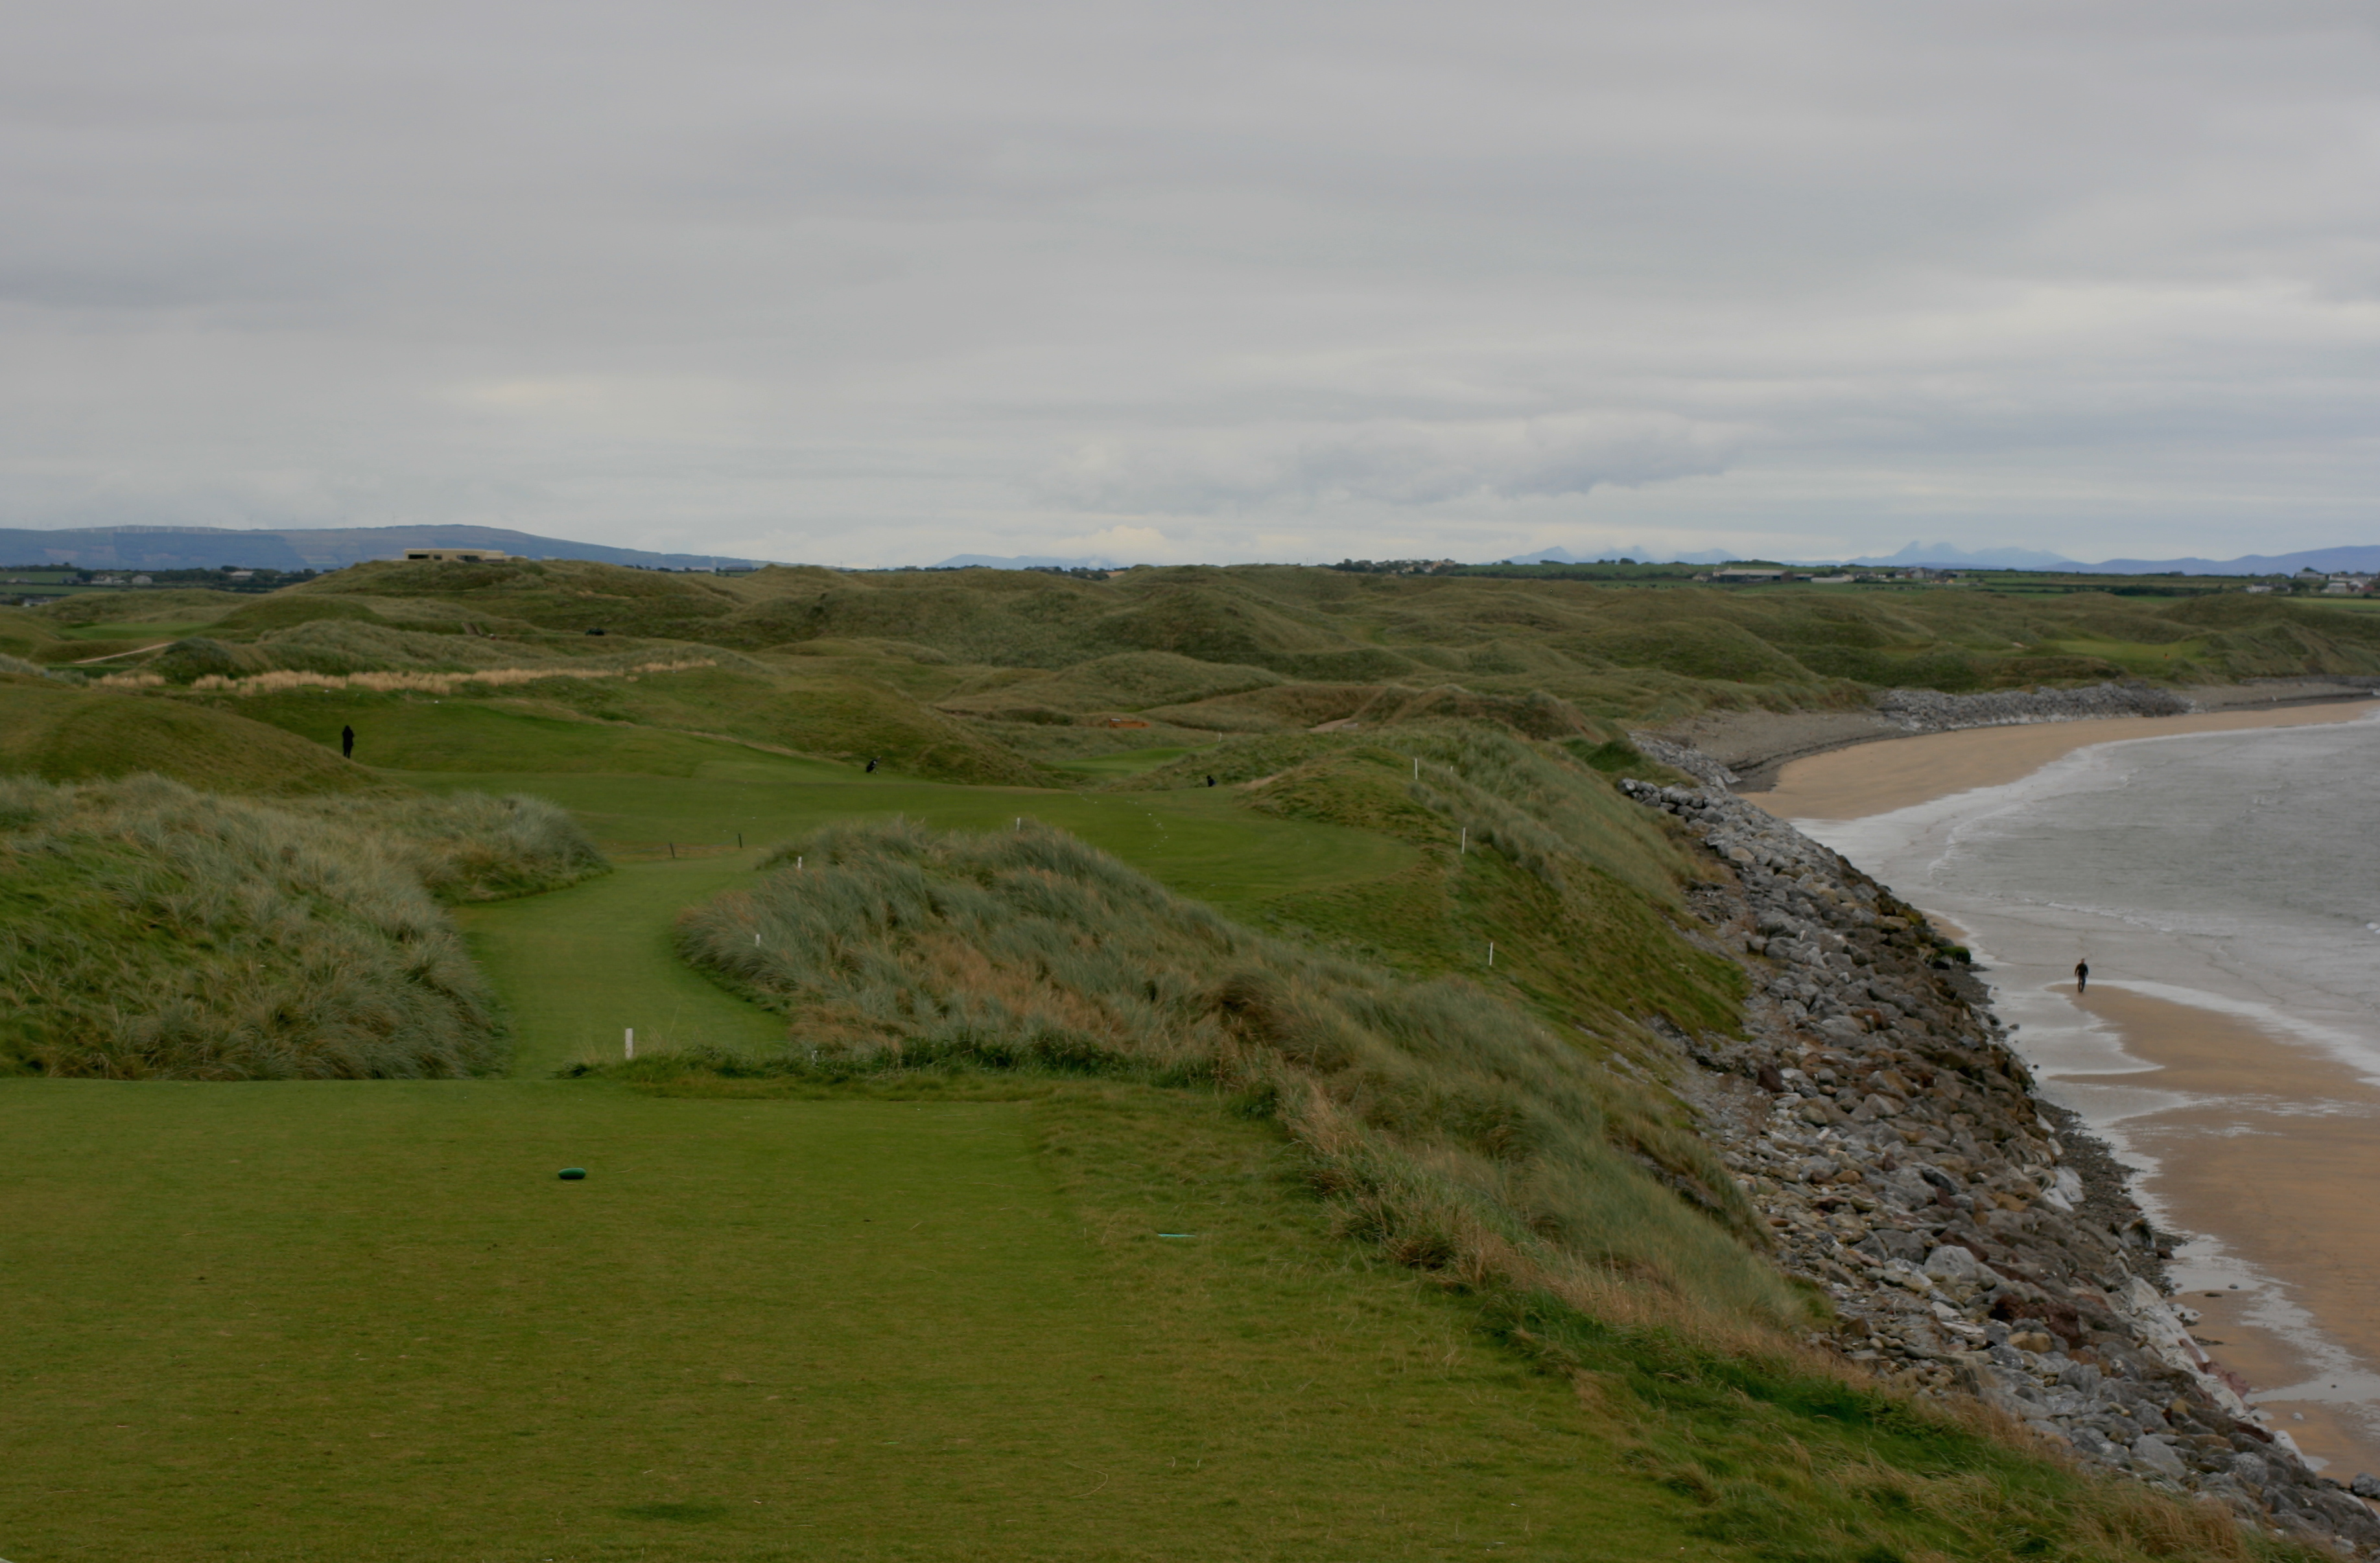 Ireland, day two:  Ballybunion, part of golf’s holy ground